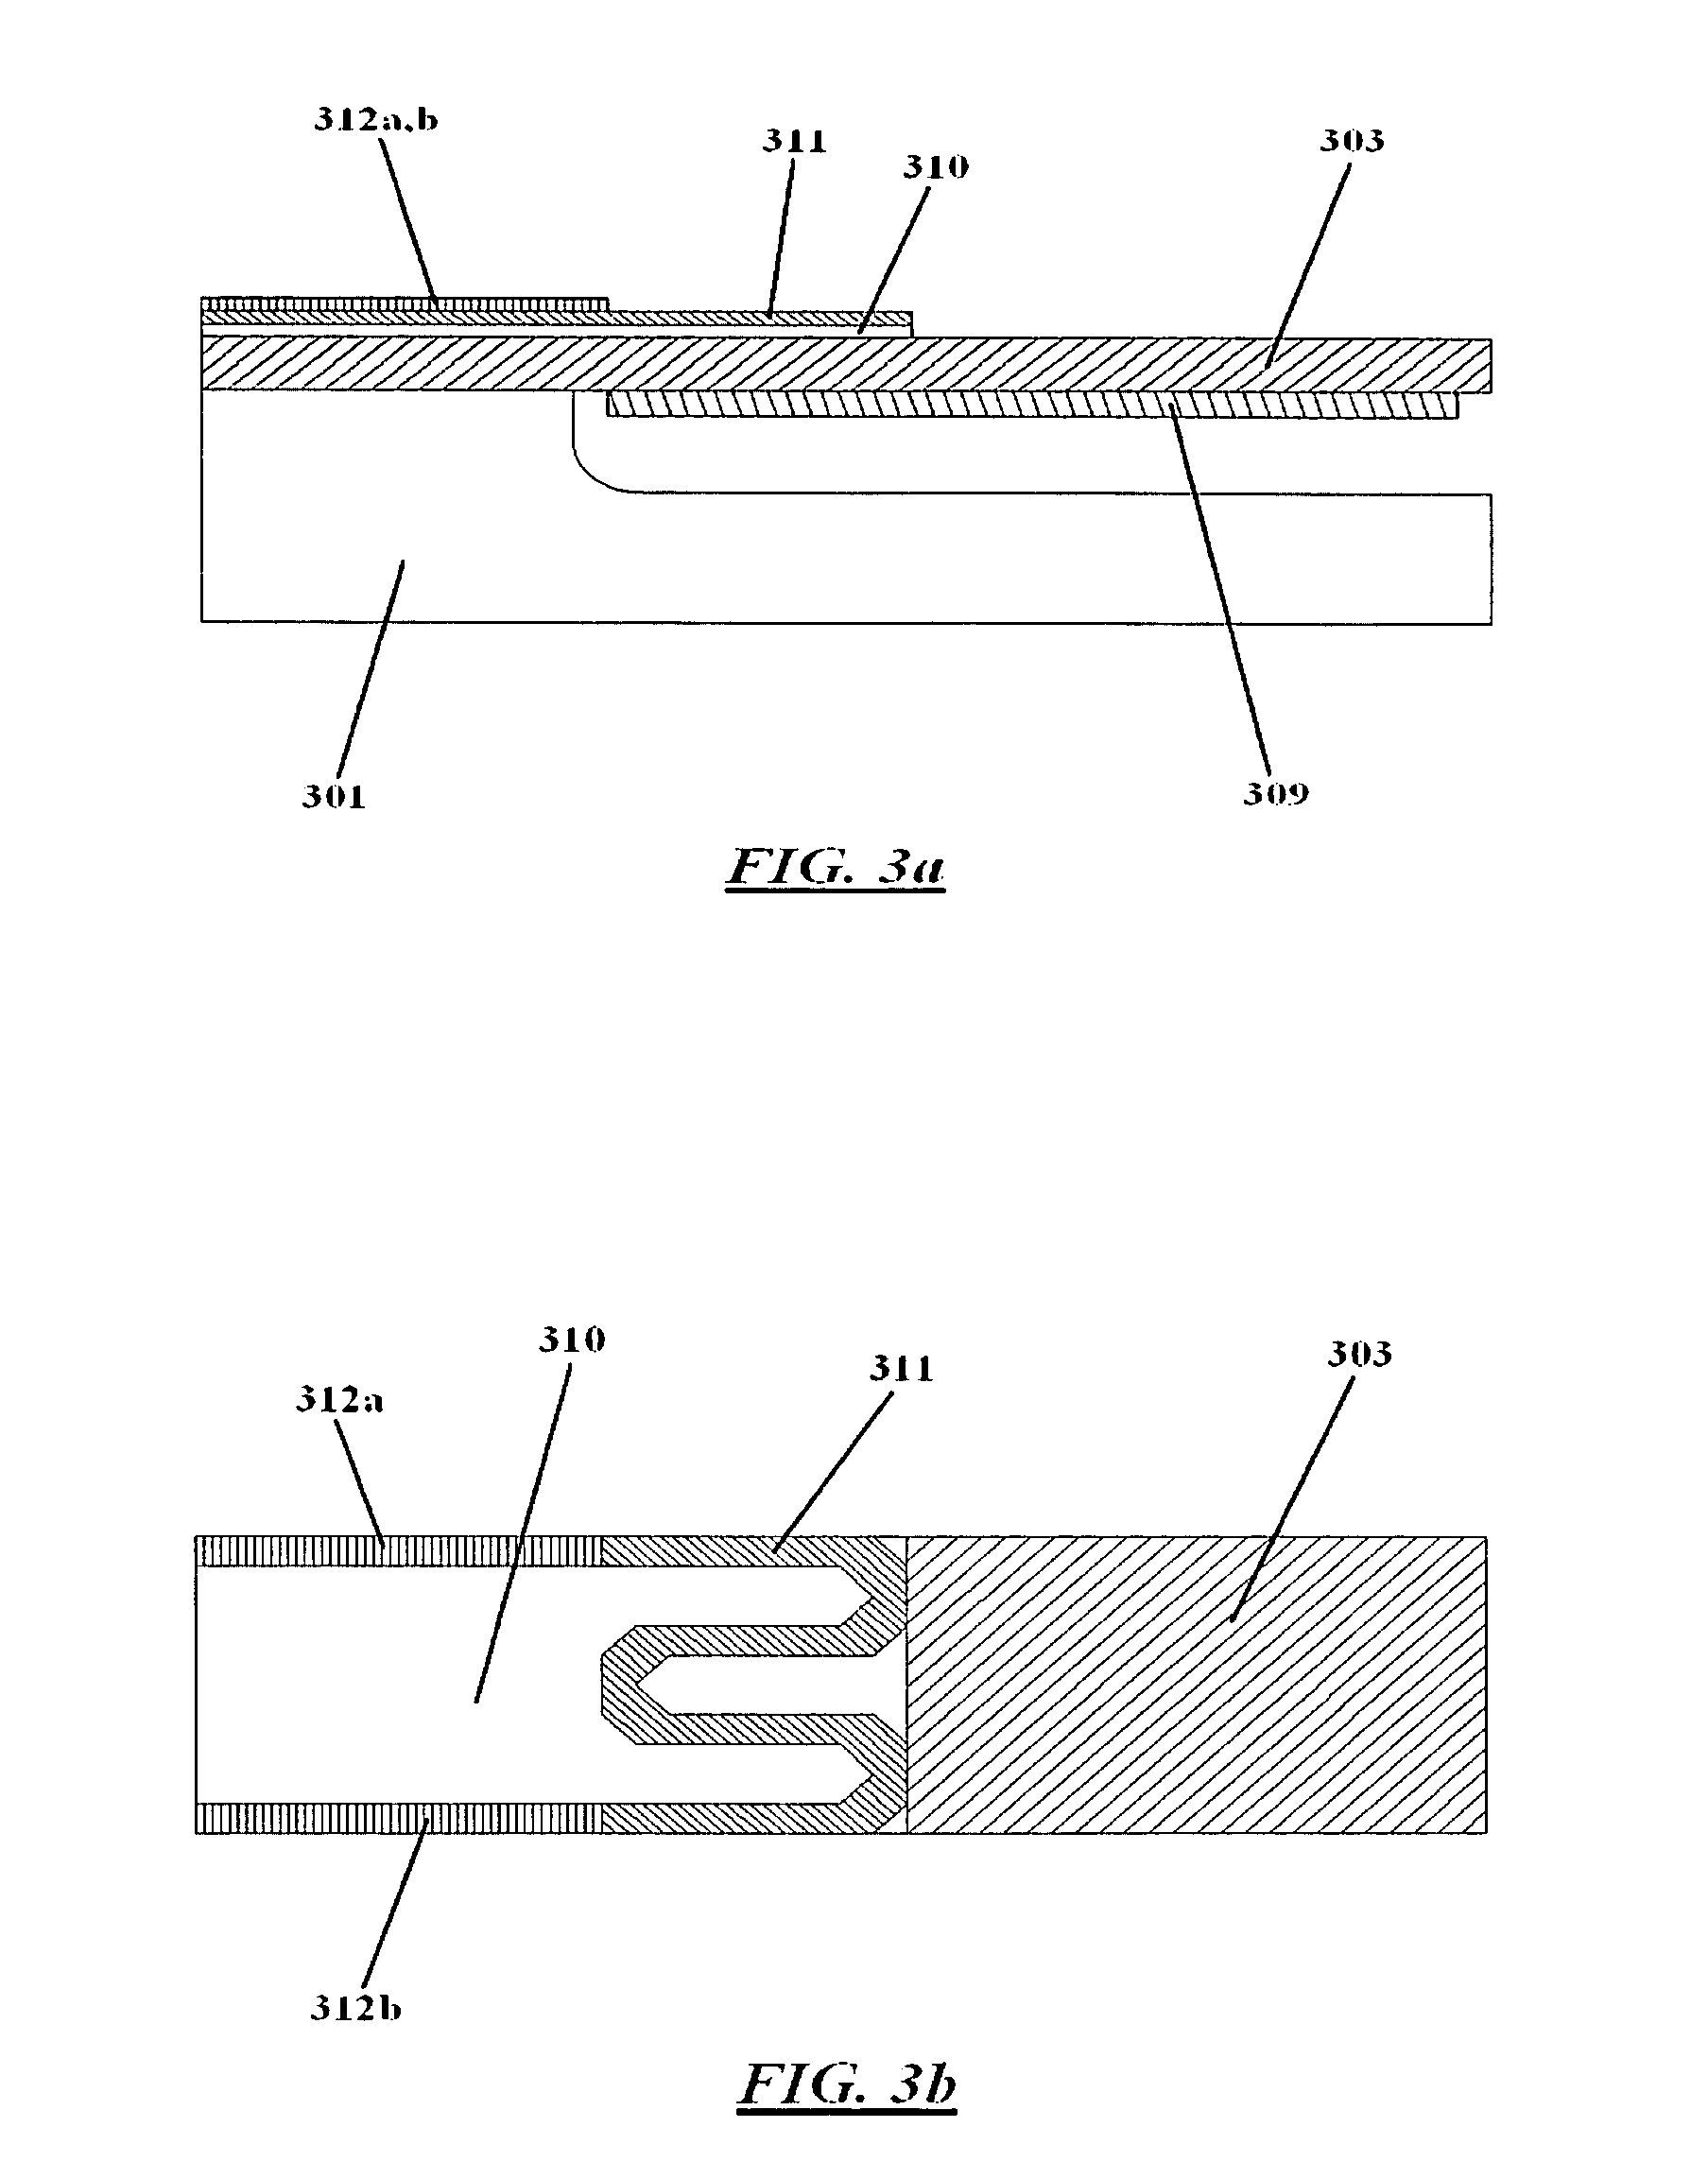 Micro-electromechanical relay and related methods